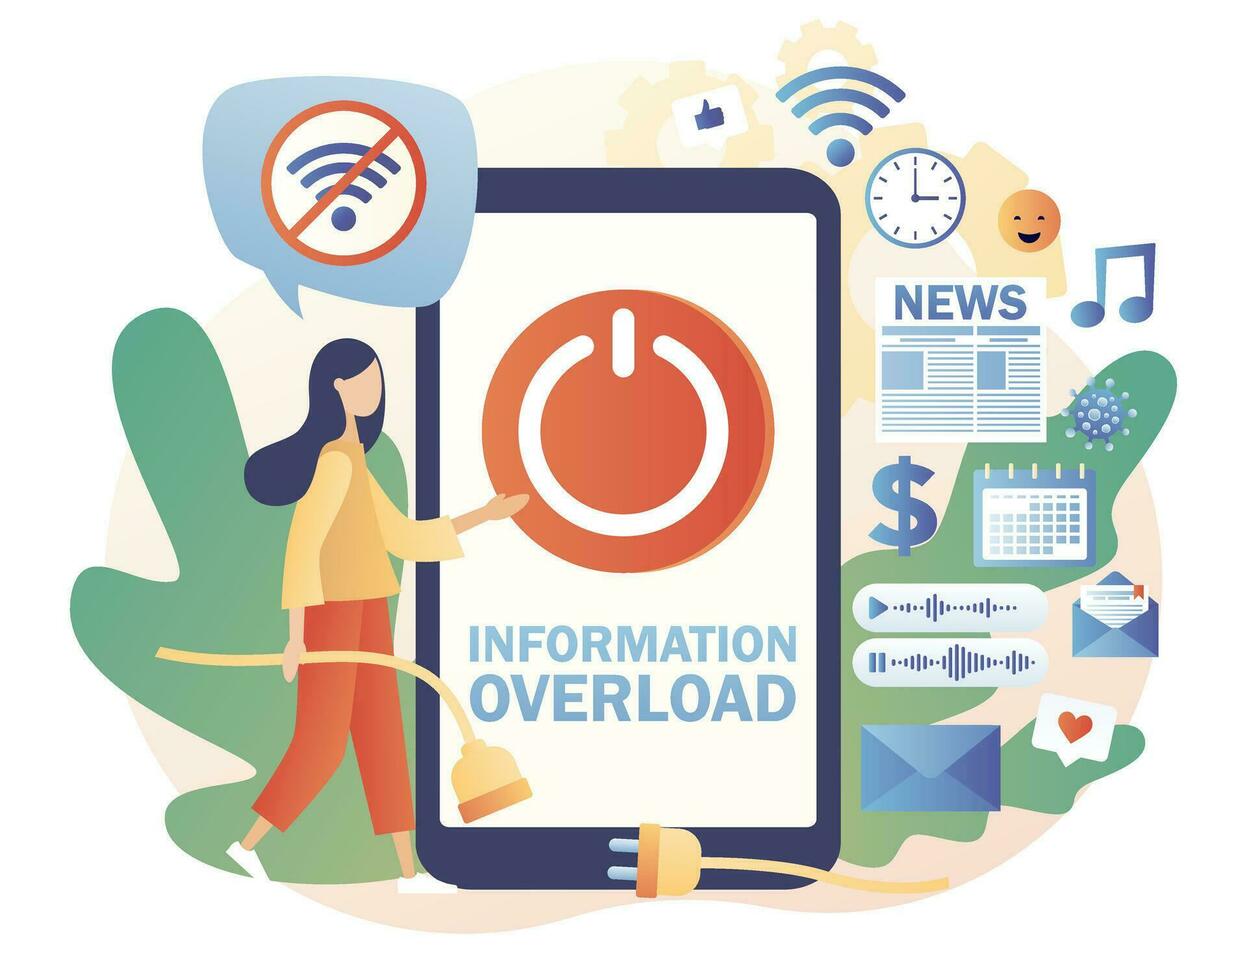 Tiny girl protecting themselves from flow of information and news turning off smartphone. Information detox. Information overload. Digital detox. Modern flat cartoon style. Vector illustration